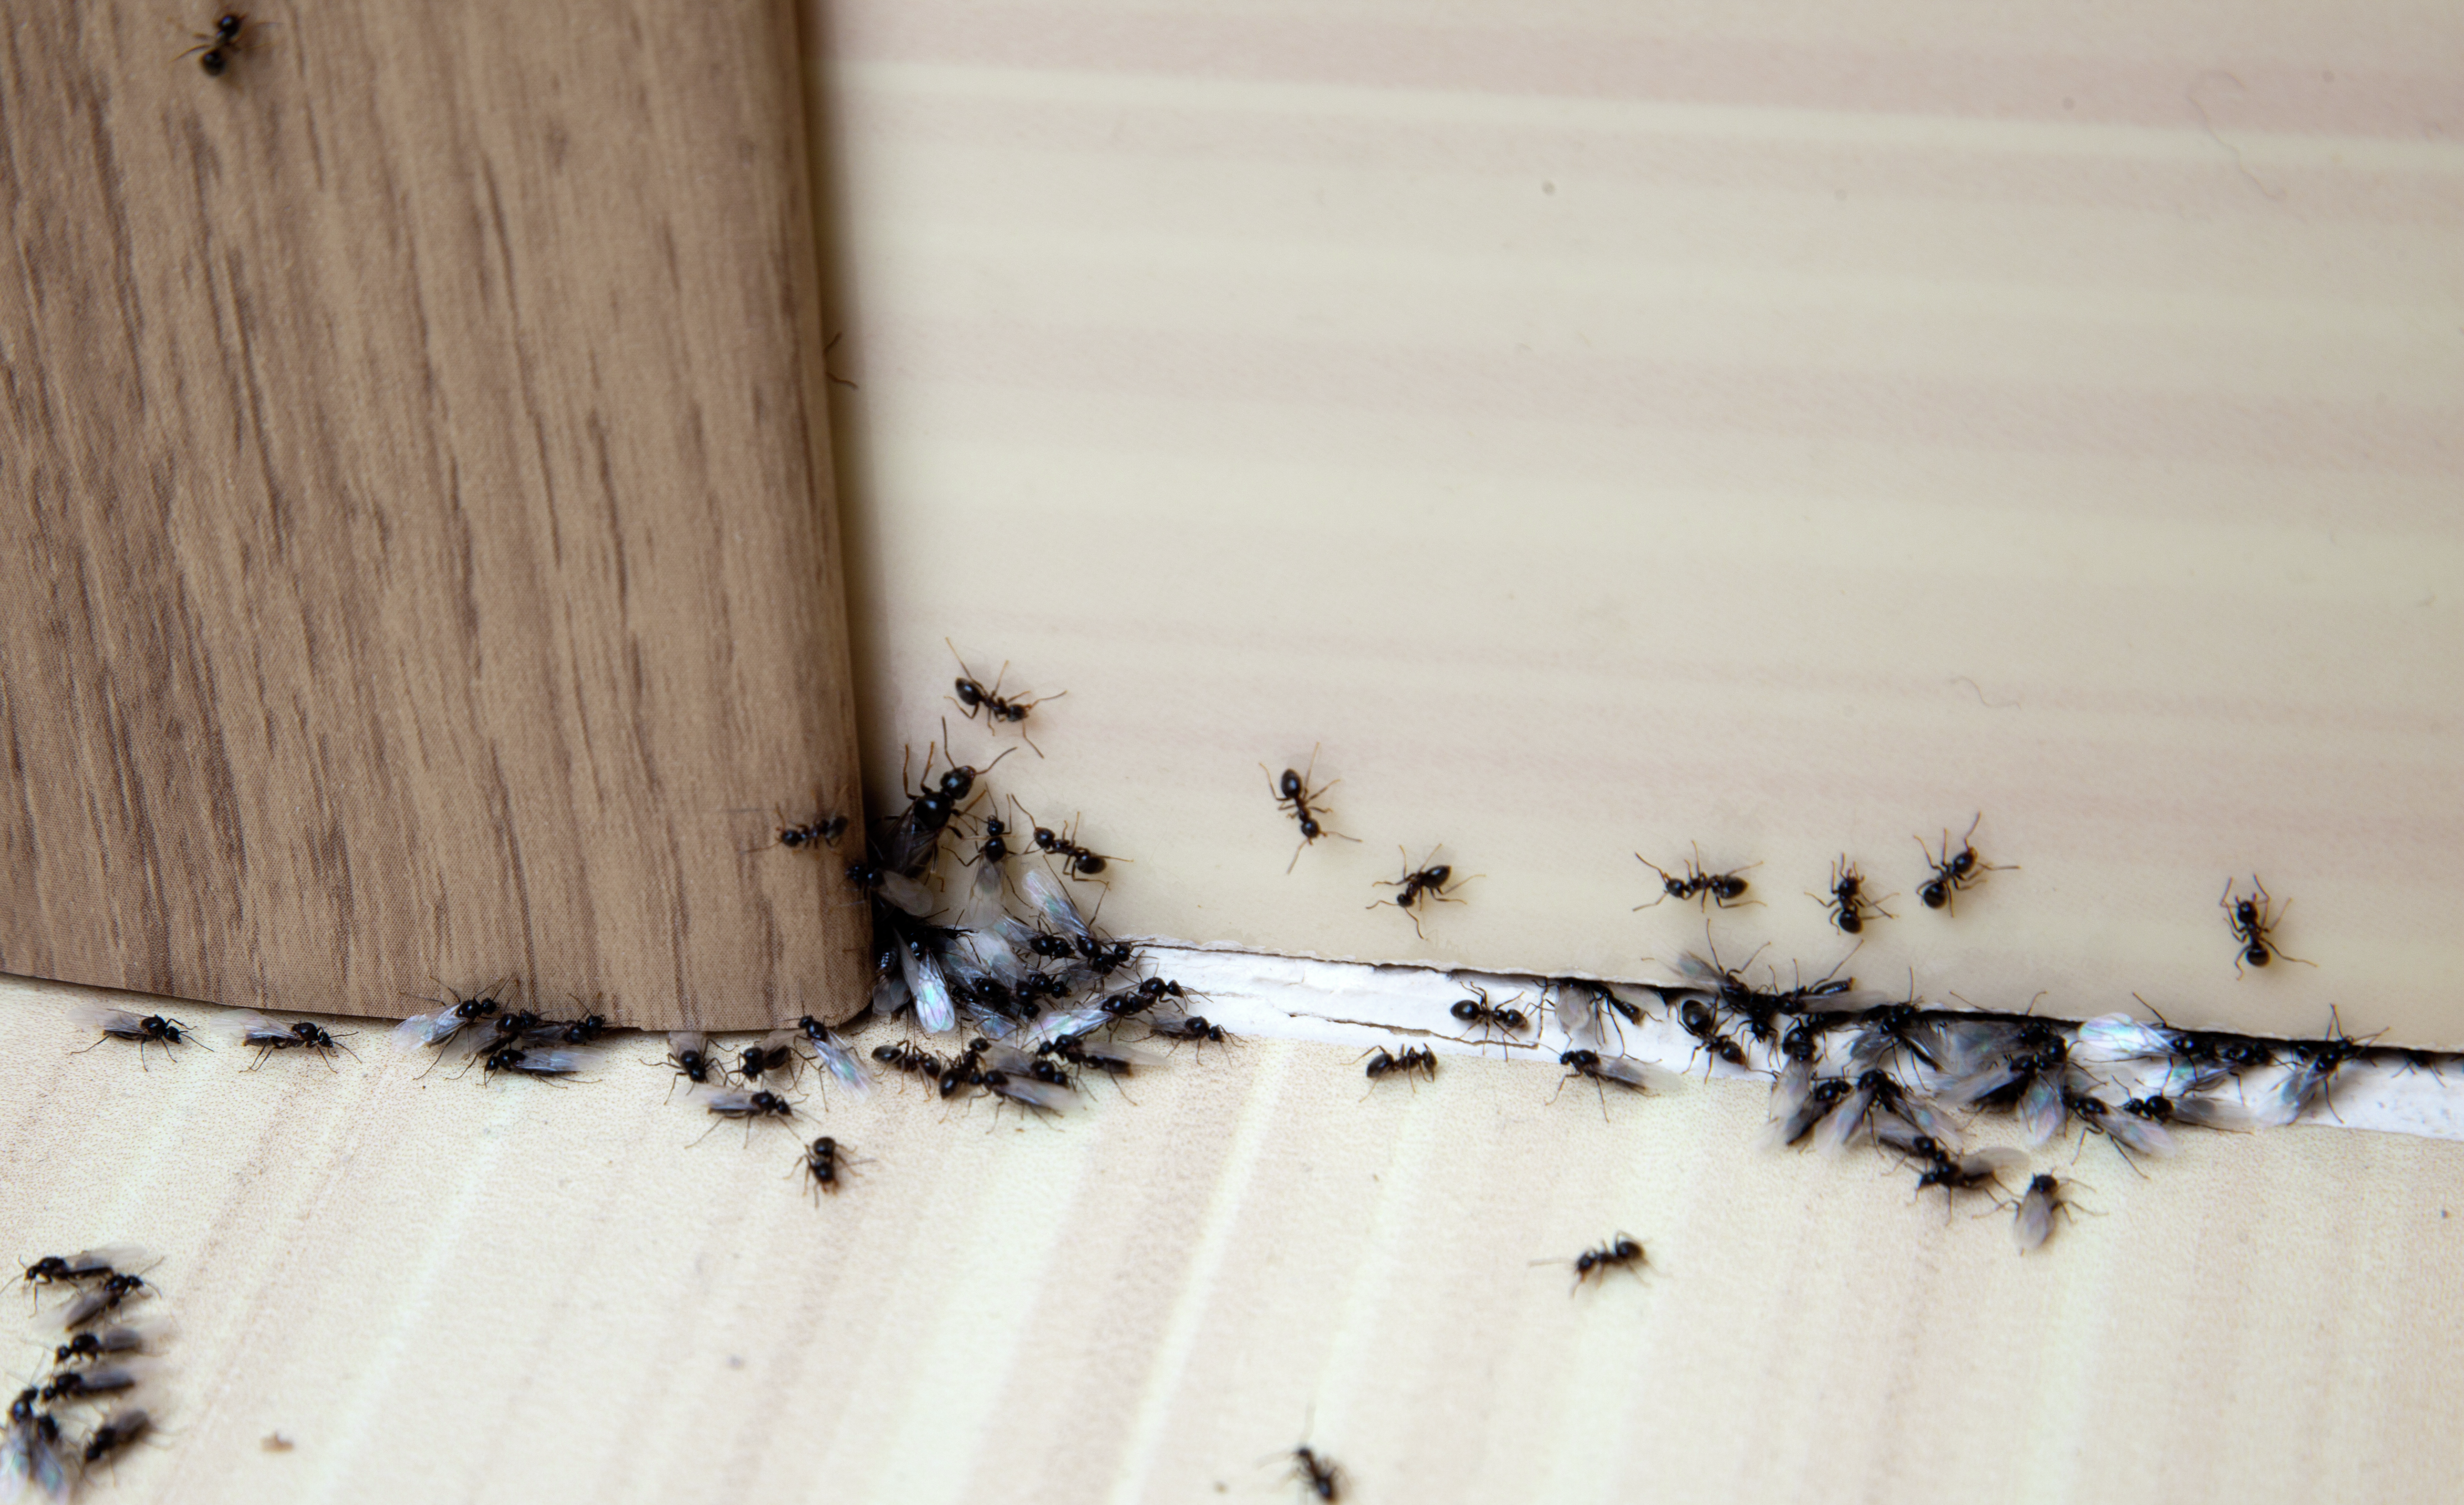 How to keep bugs out of your home